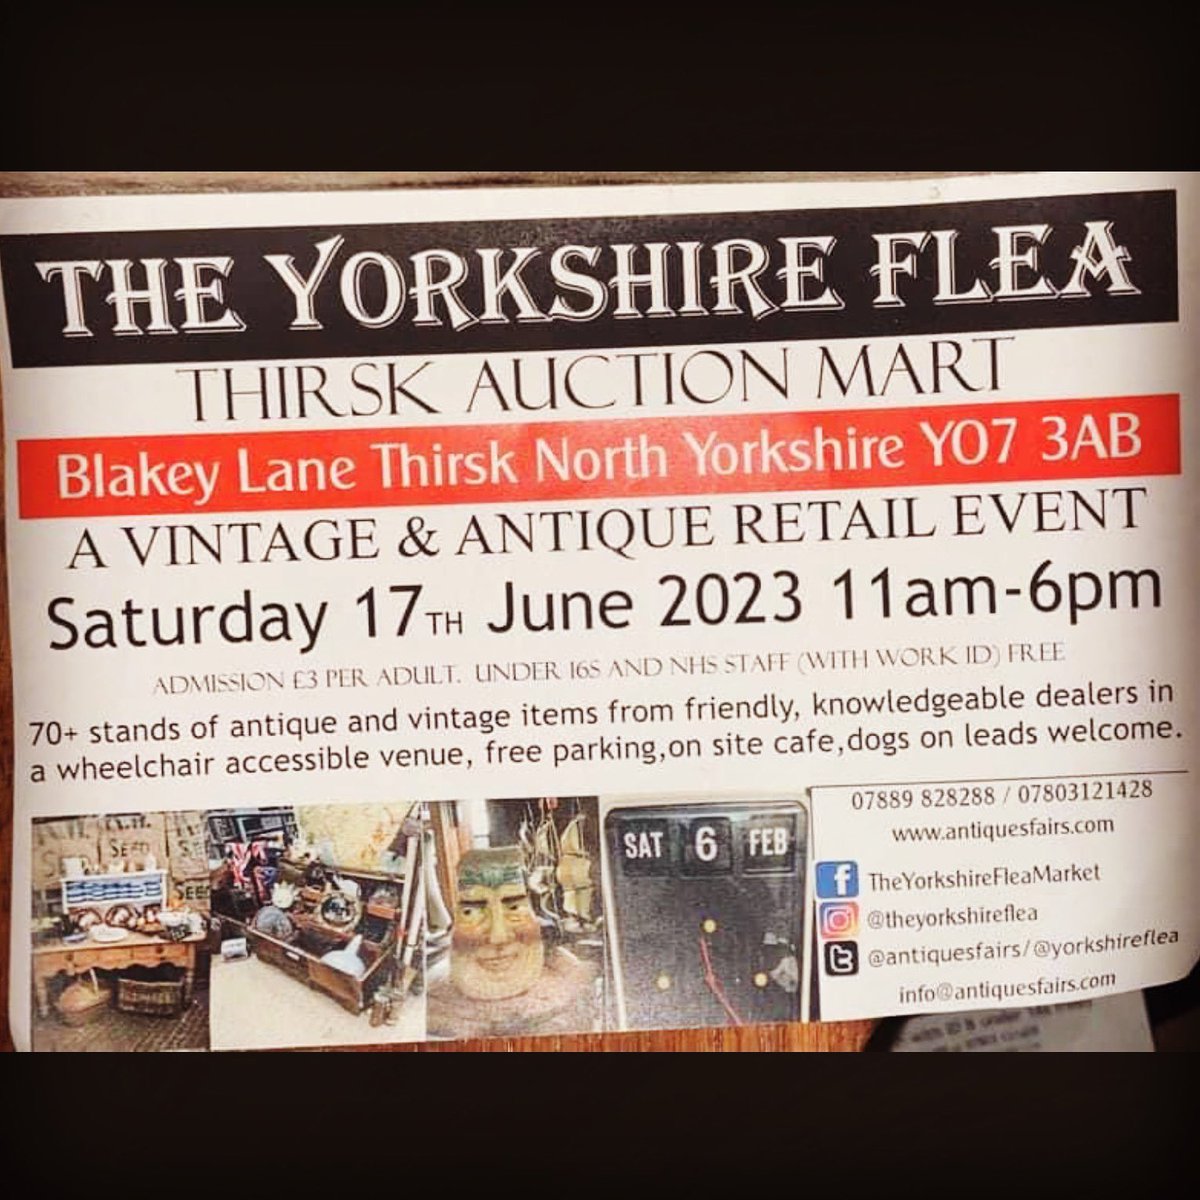 Coming up soon! 

Hosted by @theyorkshireflea at Thirsk Auction Mart … I’ve got lots of tins, suitcases and curiosities ready!

See you there?

#thirsk #northyorkshire #vintage #vintagefair #vintage #vintagetin #vintagetins